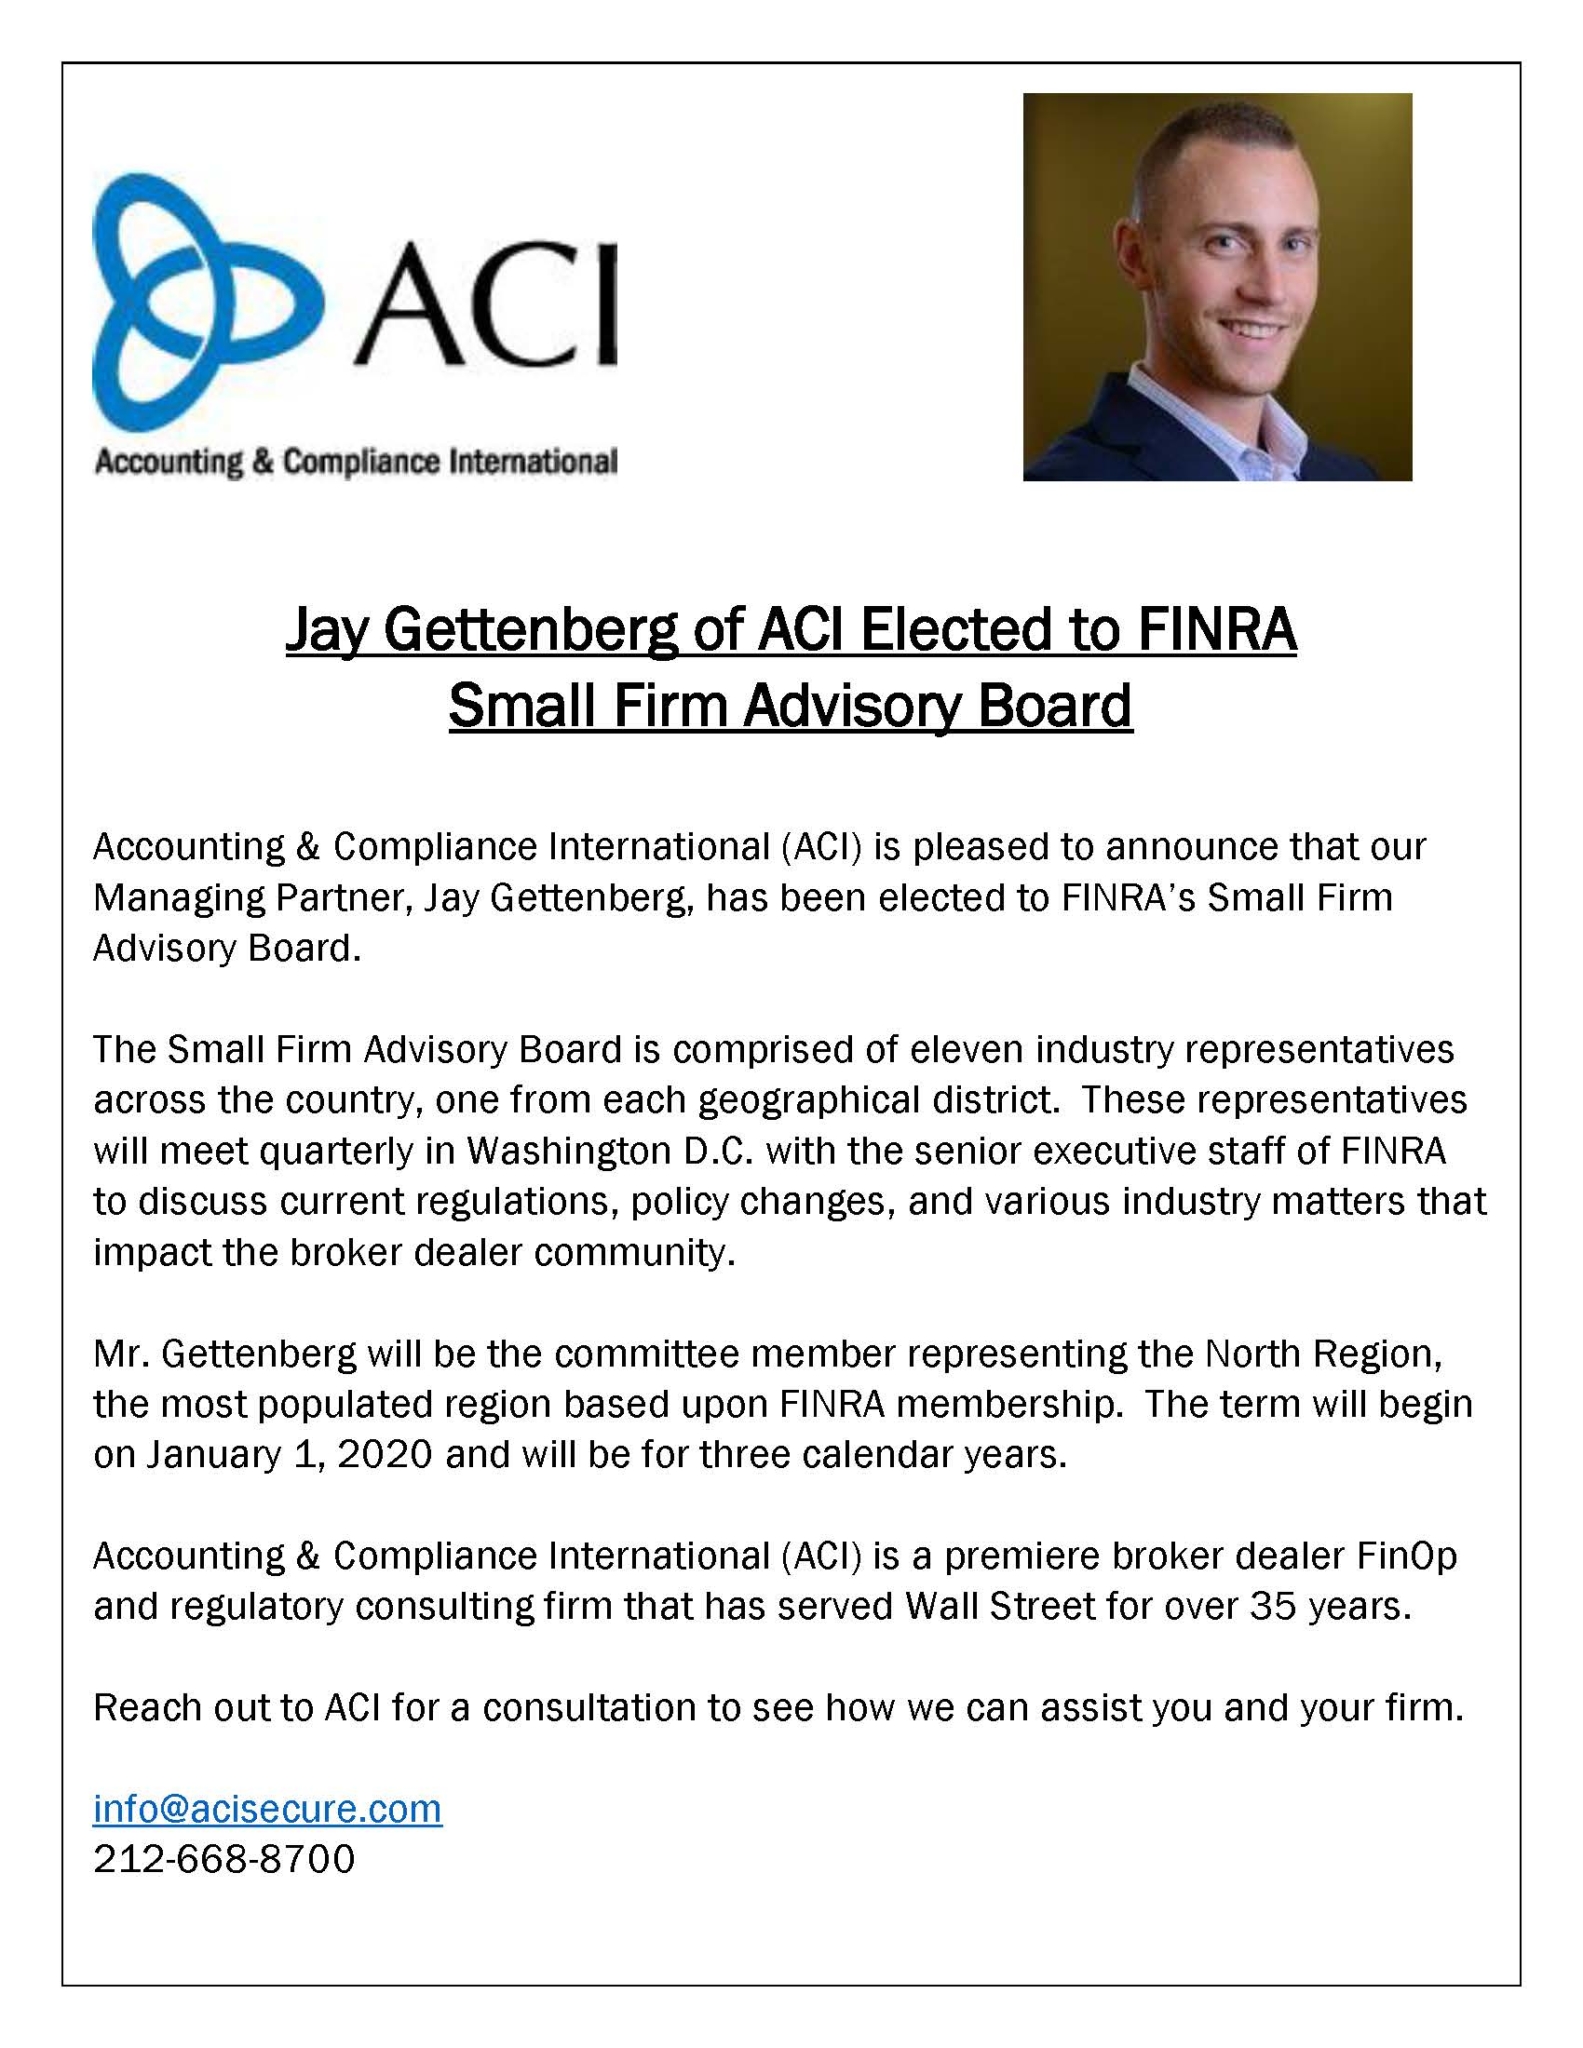 Jay Gettenberg of ACI Elected to FINRA Small Firm Advisory Board — ACI